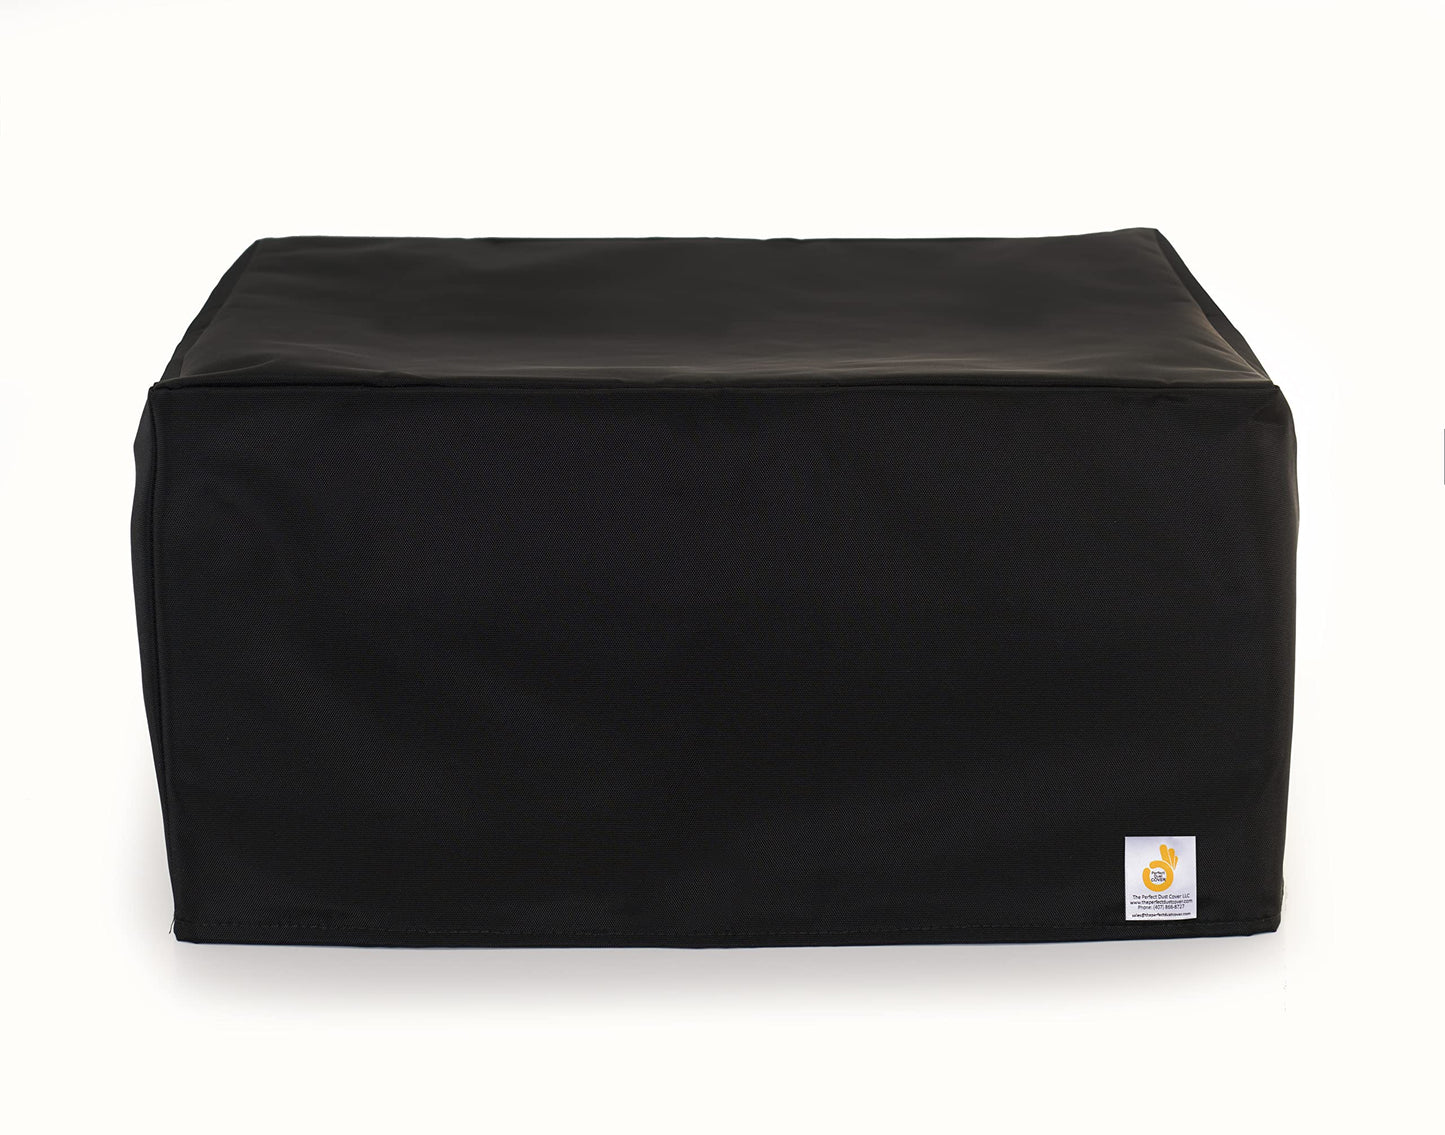 Perfect Dust Cover, Black Nylon Dust Cover Compatible with Canon Pixma TS5320, Canon Pixma TS6420 and Canon Pixma TS6420a All-in-One Printers, Double Stitched and Waterproof by The Perfect Dust Cover LLC